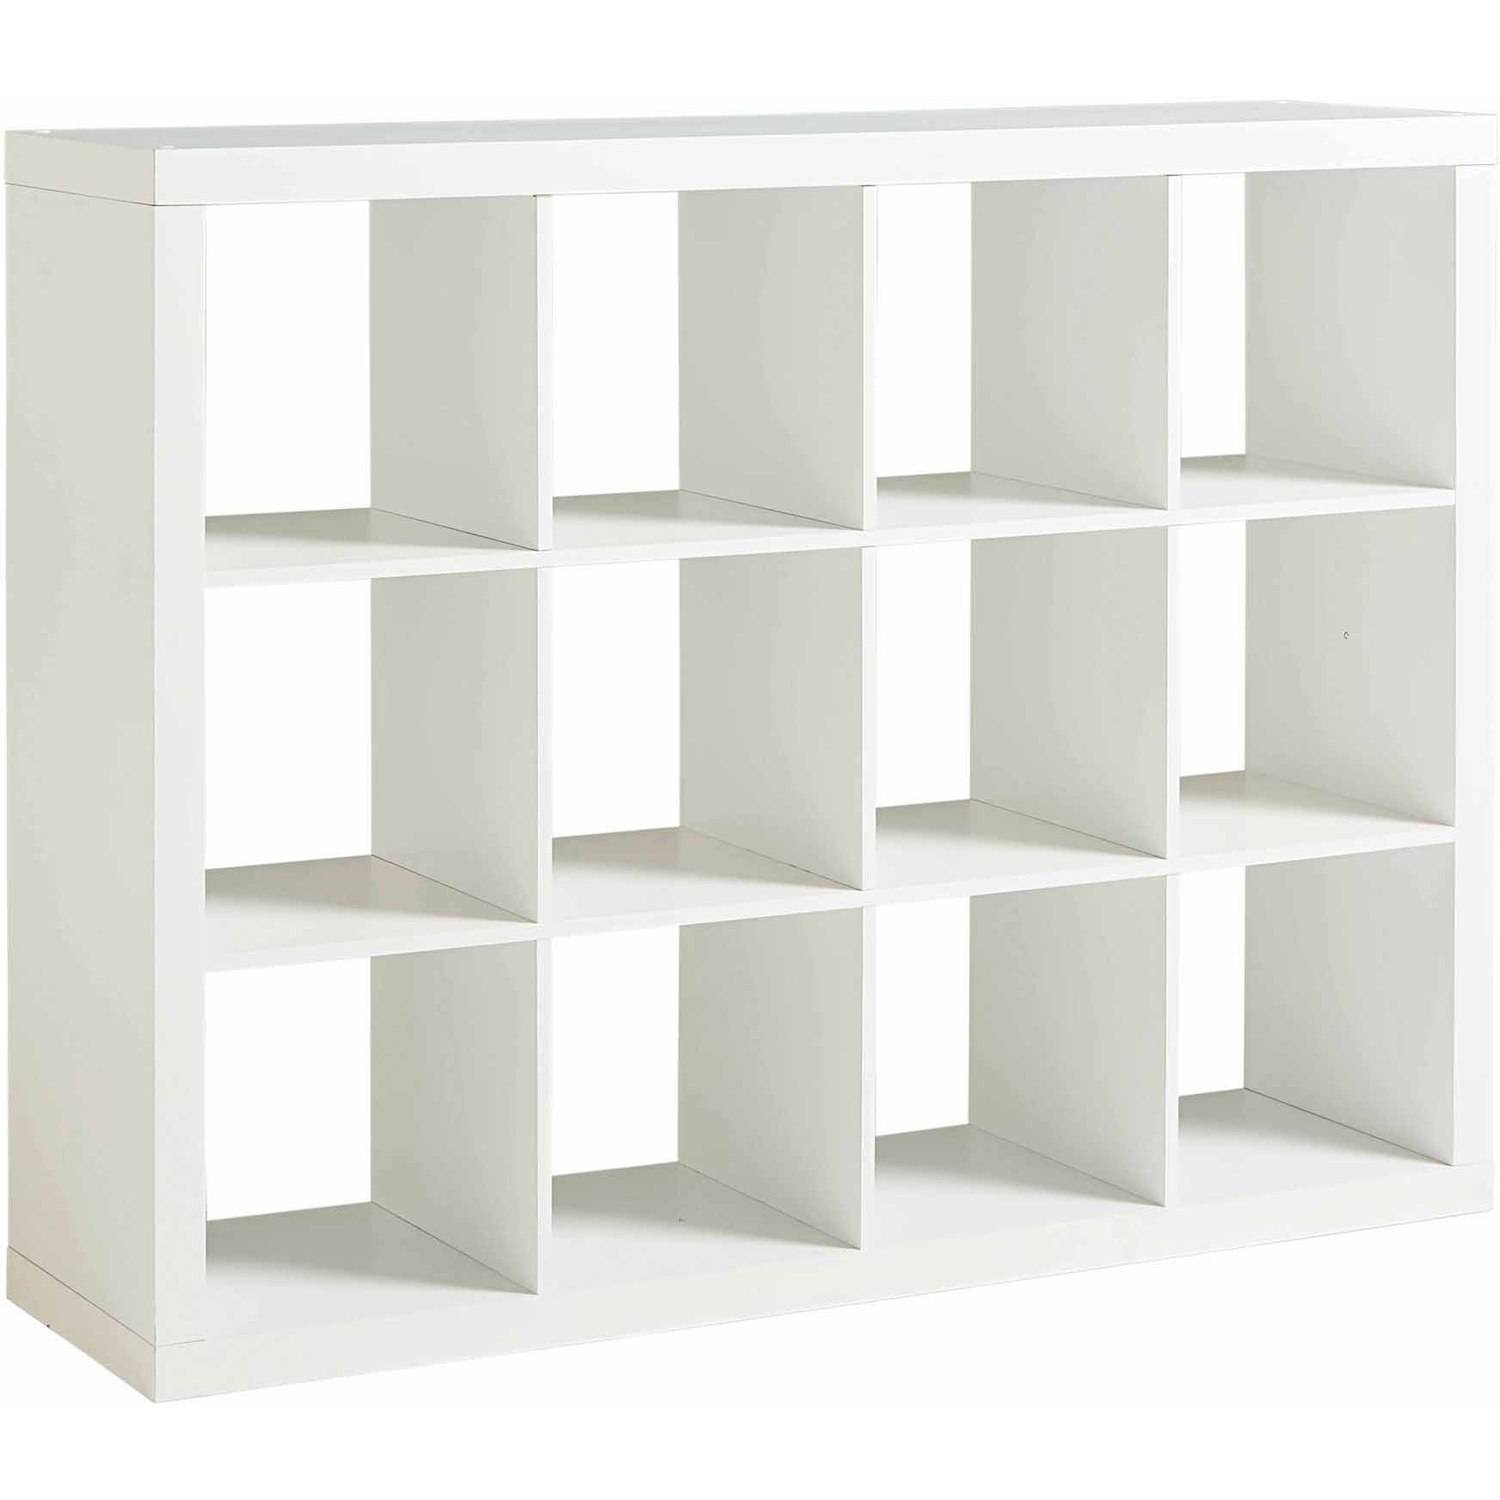 Better Homes and Gardens 12 Cube Storage Organizer, Multiple Colors - image 1 of 6